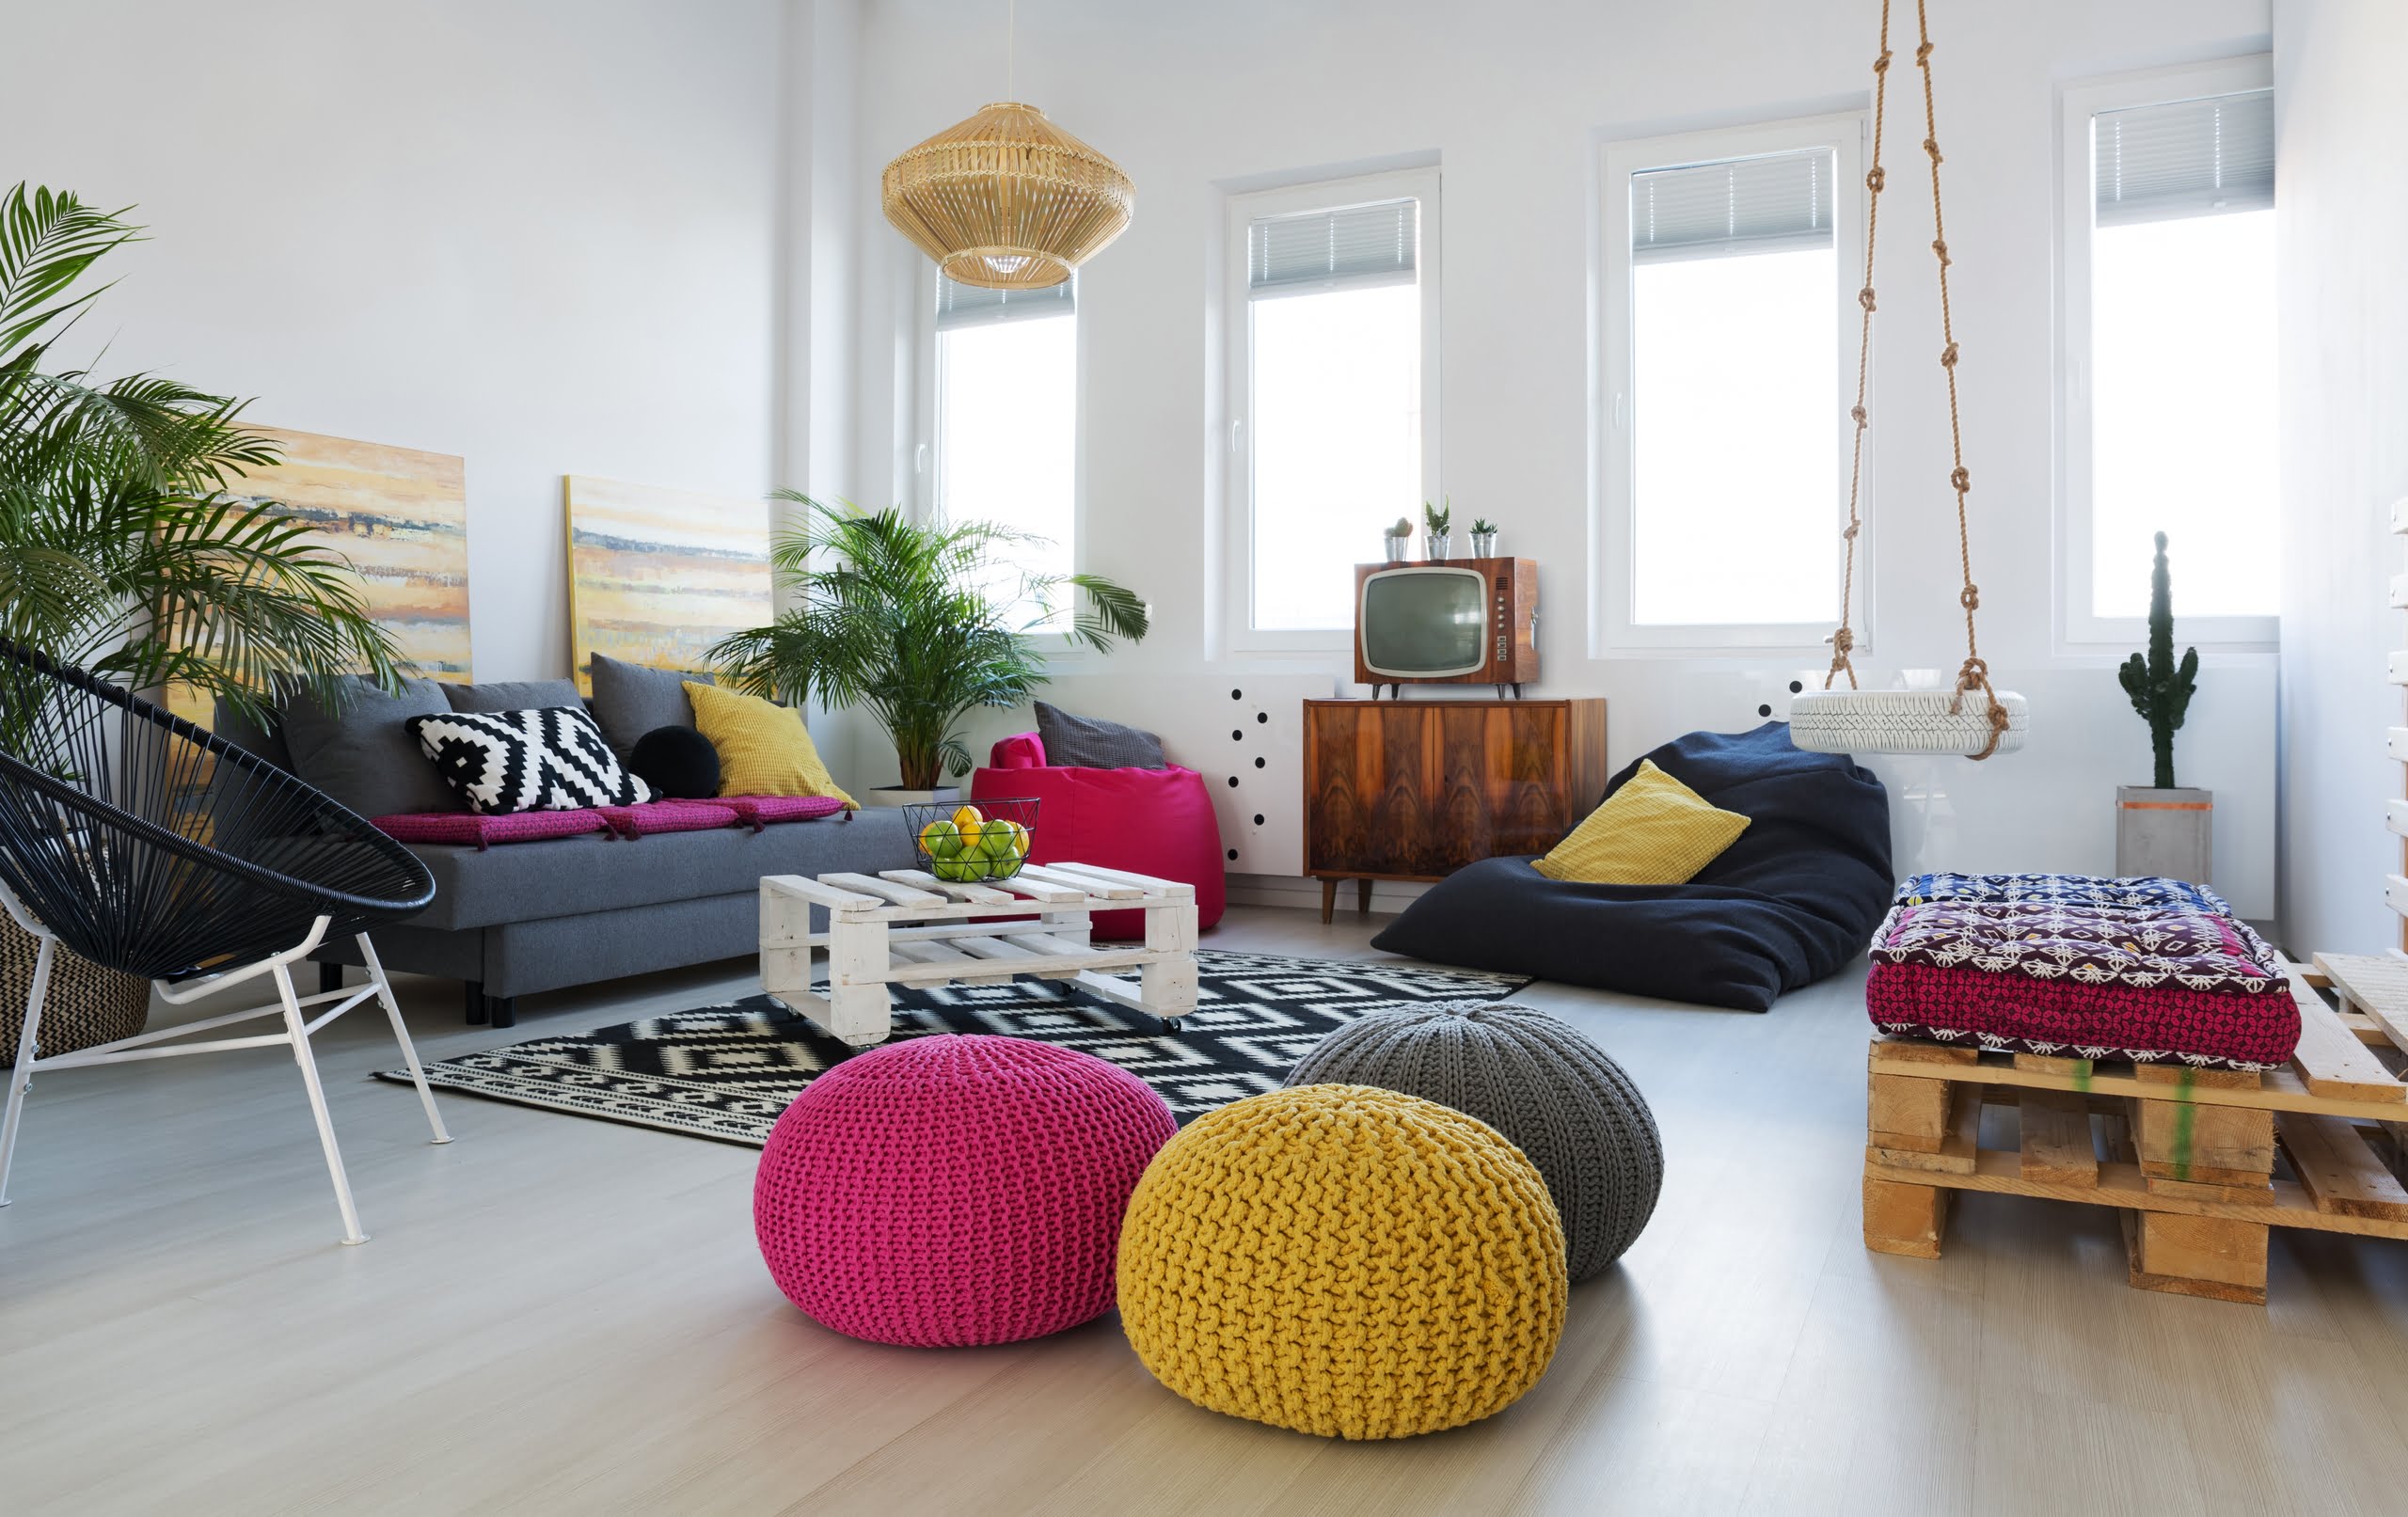 Living Room With Pink Bean Bag Chair